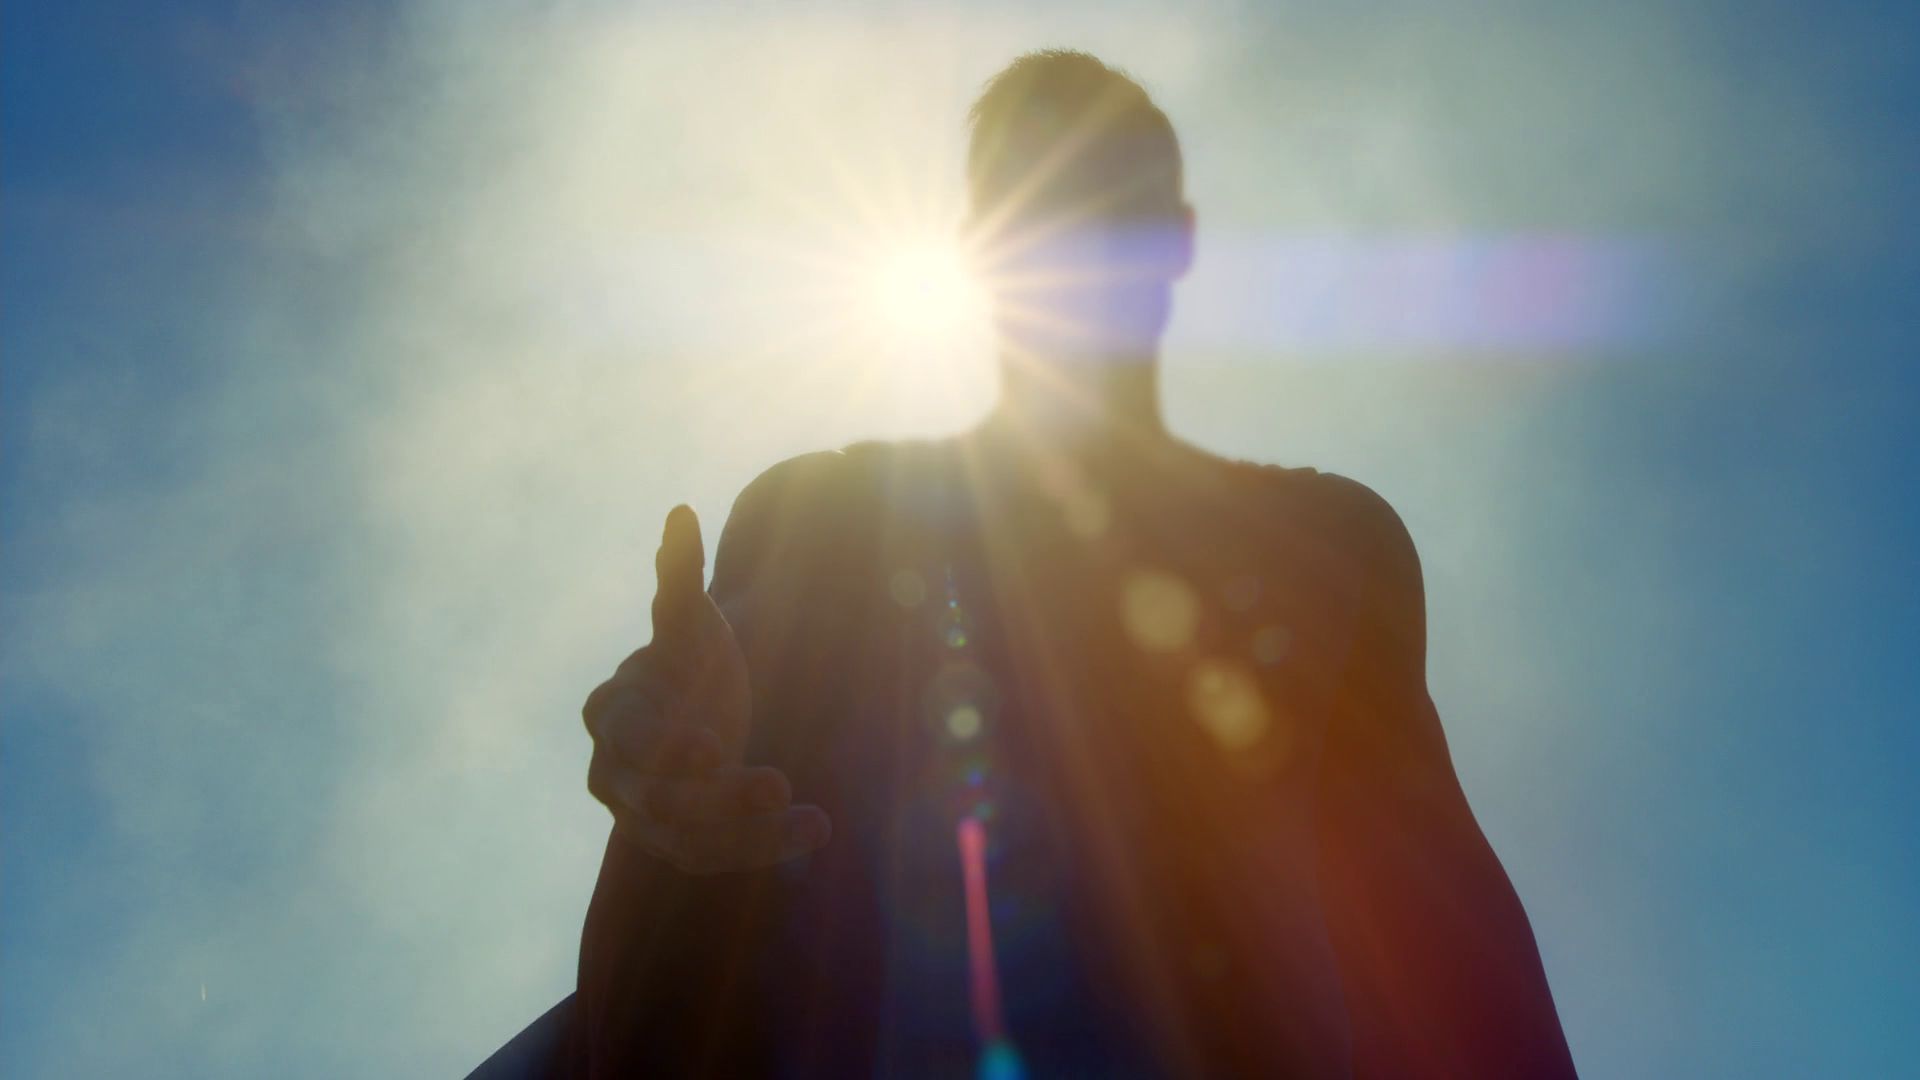 A superman backlit by the sun so you can’t see who it is